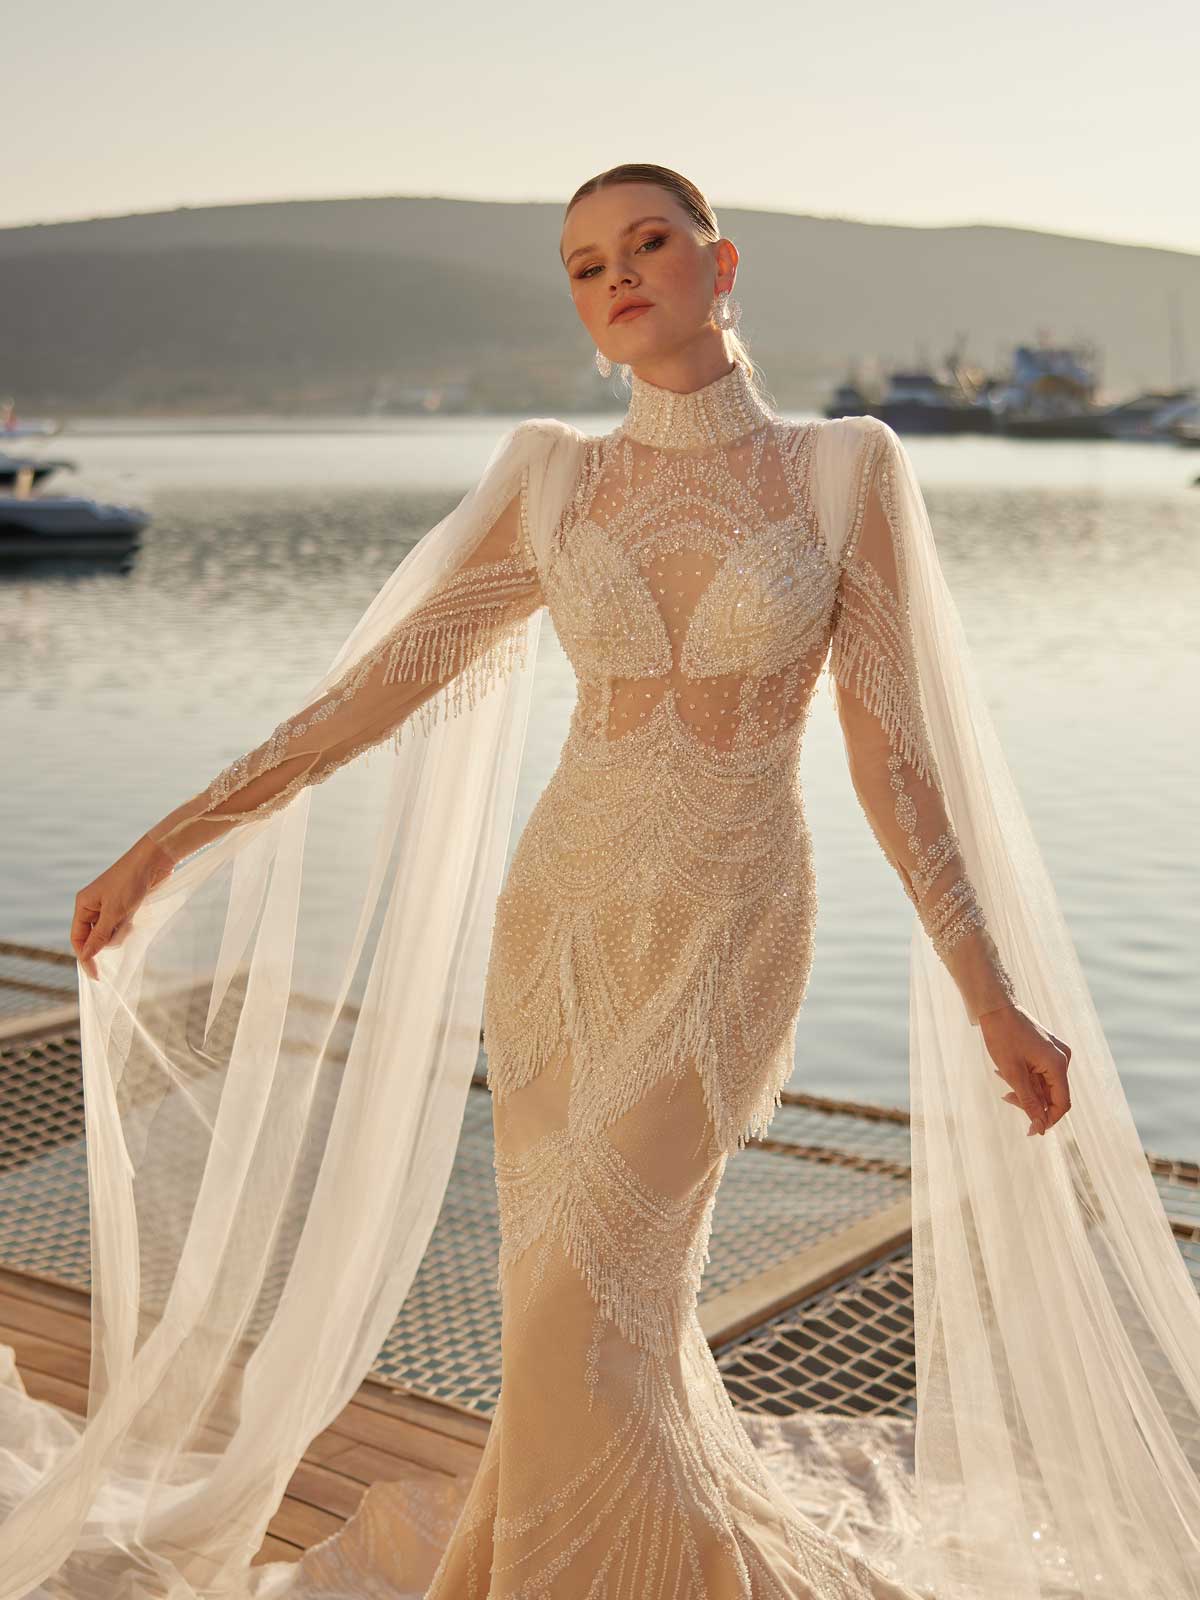 buy elegant Illusion Ivory Lace Wedding Dress with tulle cape long sleeves Bridal Gown  Summer Beach wedding gowns online boutiques